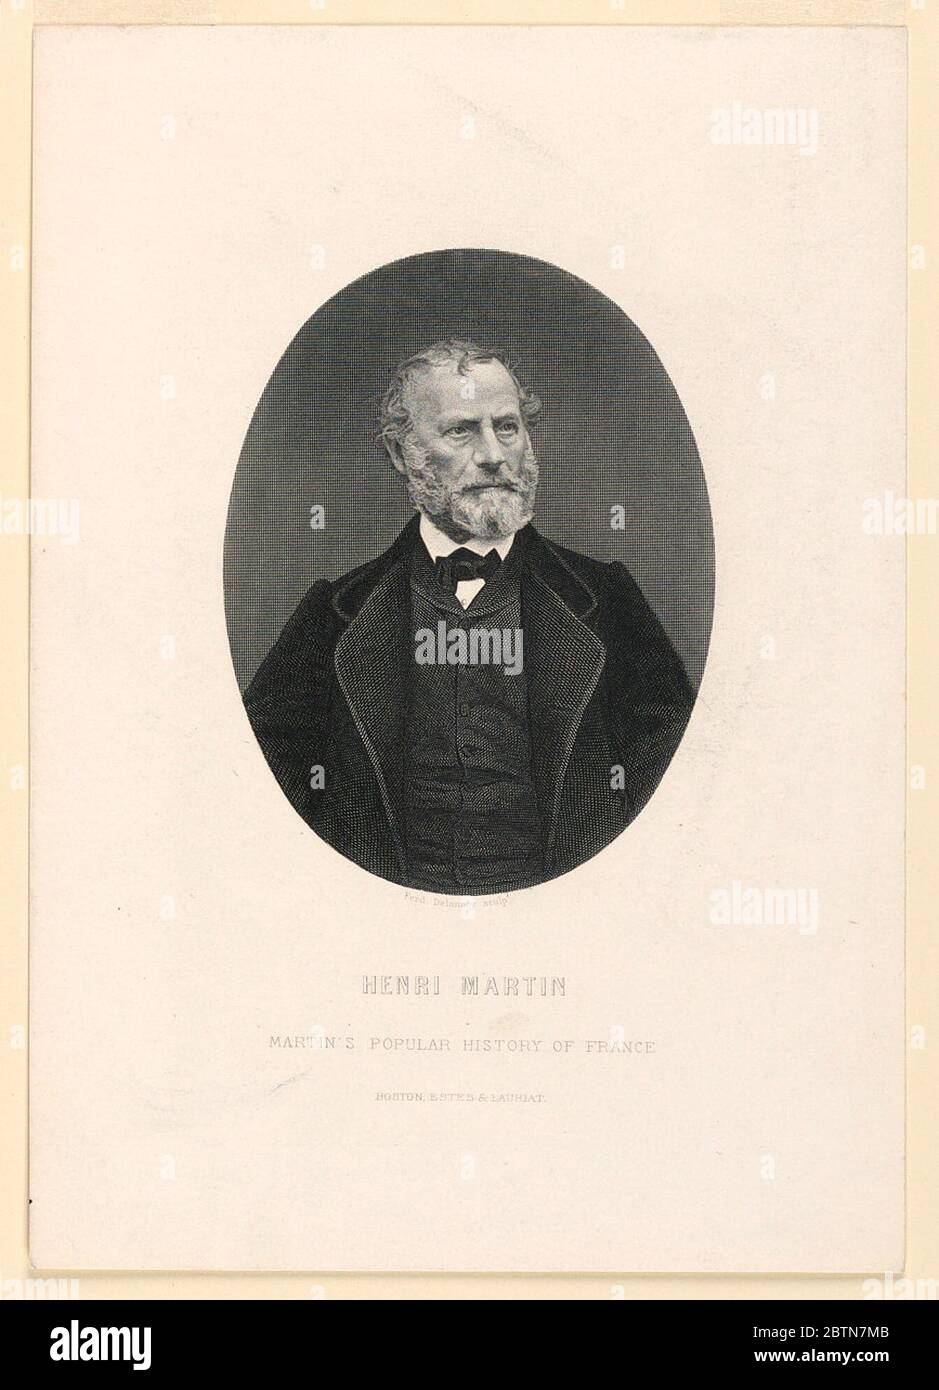 Portrait of Henri Martin. Research in ProgressWithin an oval is a half-length portrait of the French historian, Henri Martin (1810-1883), shown facing frontally, his gaze directed toward the right. He wears a short beard and black bow tie. Illustration for Martin's 'Popular History of France.' Stock Photo